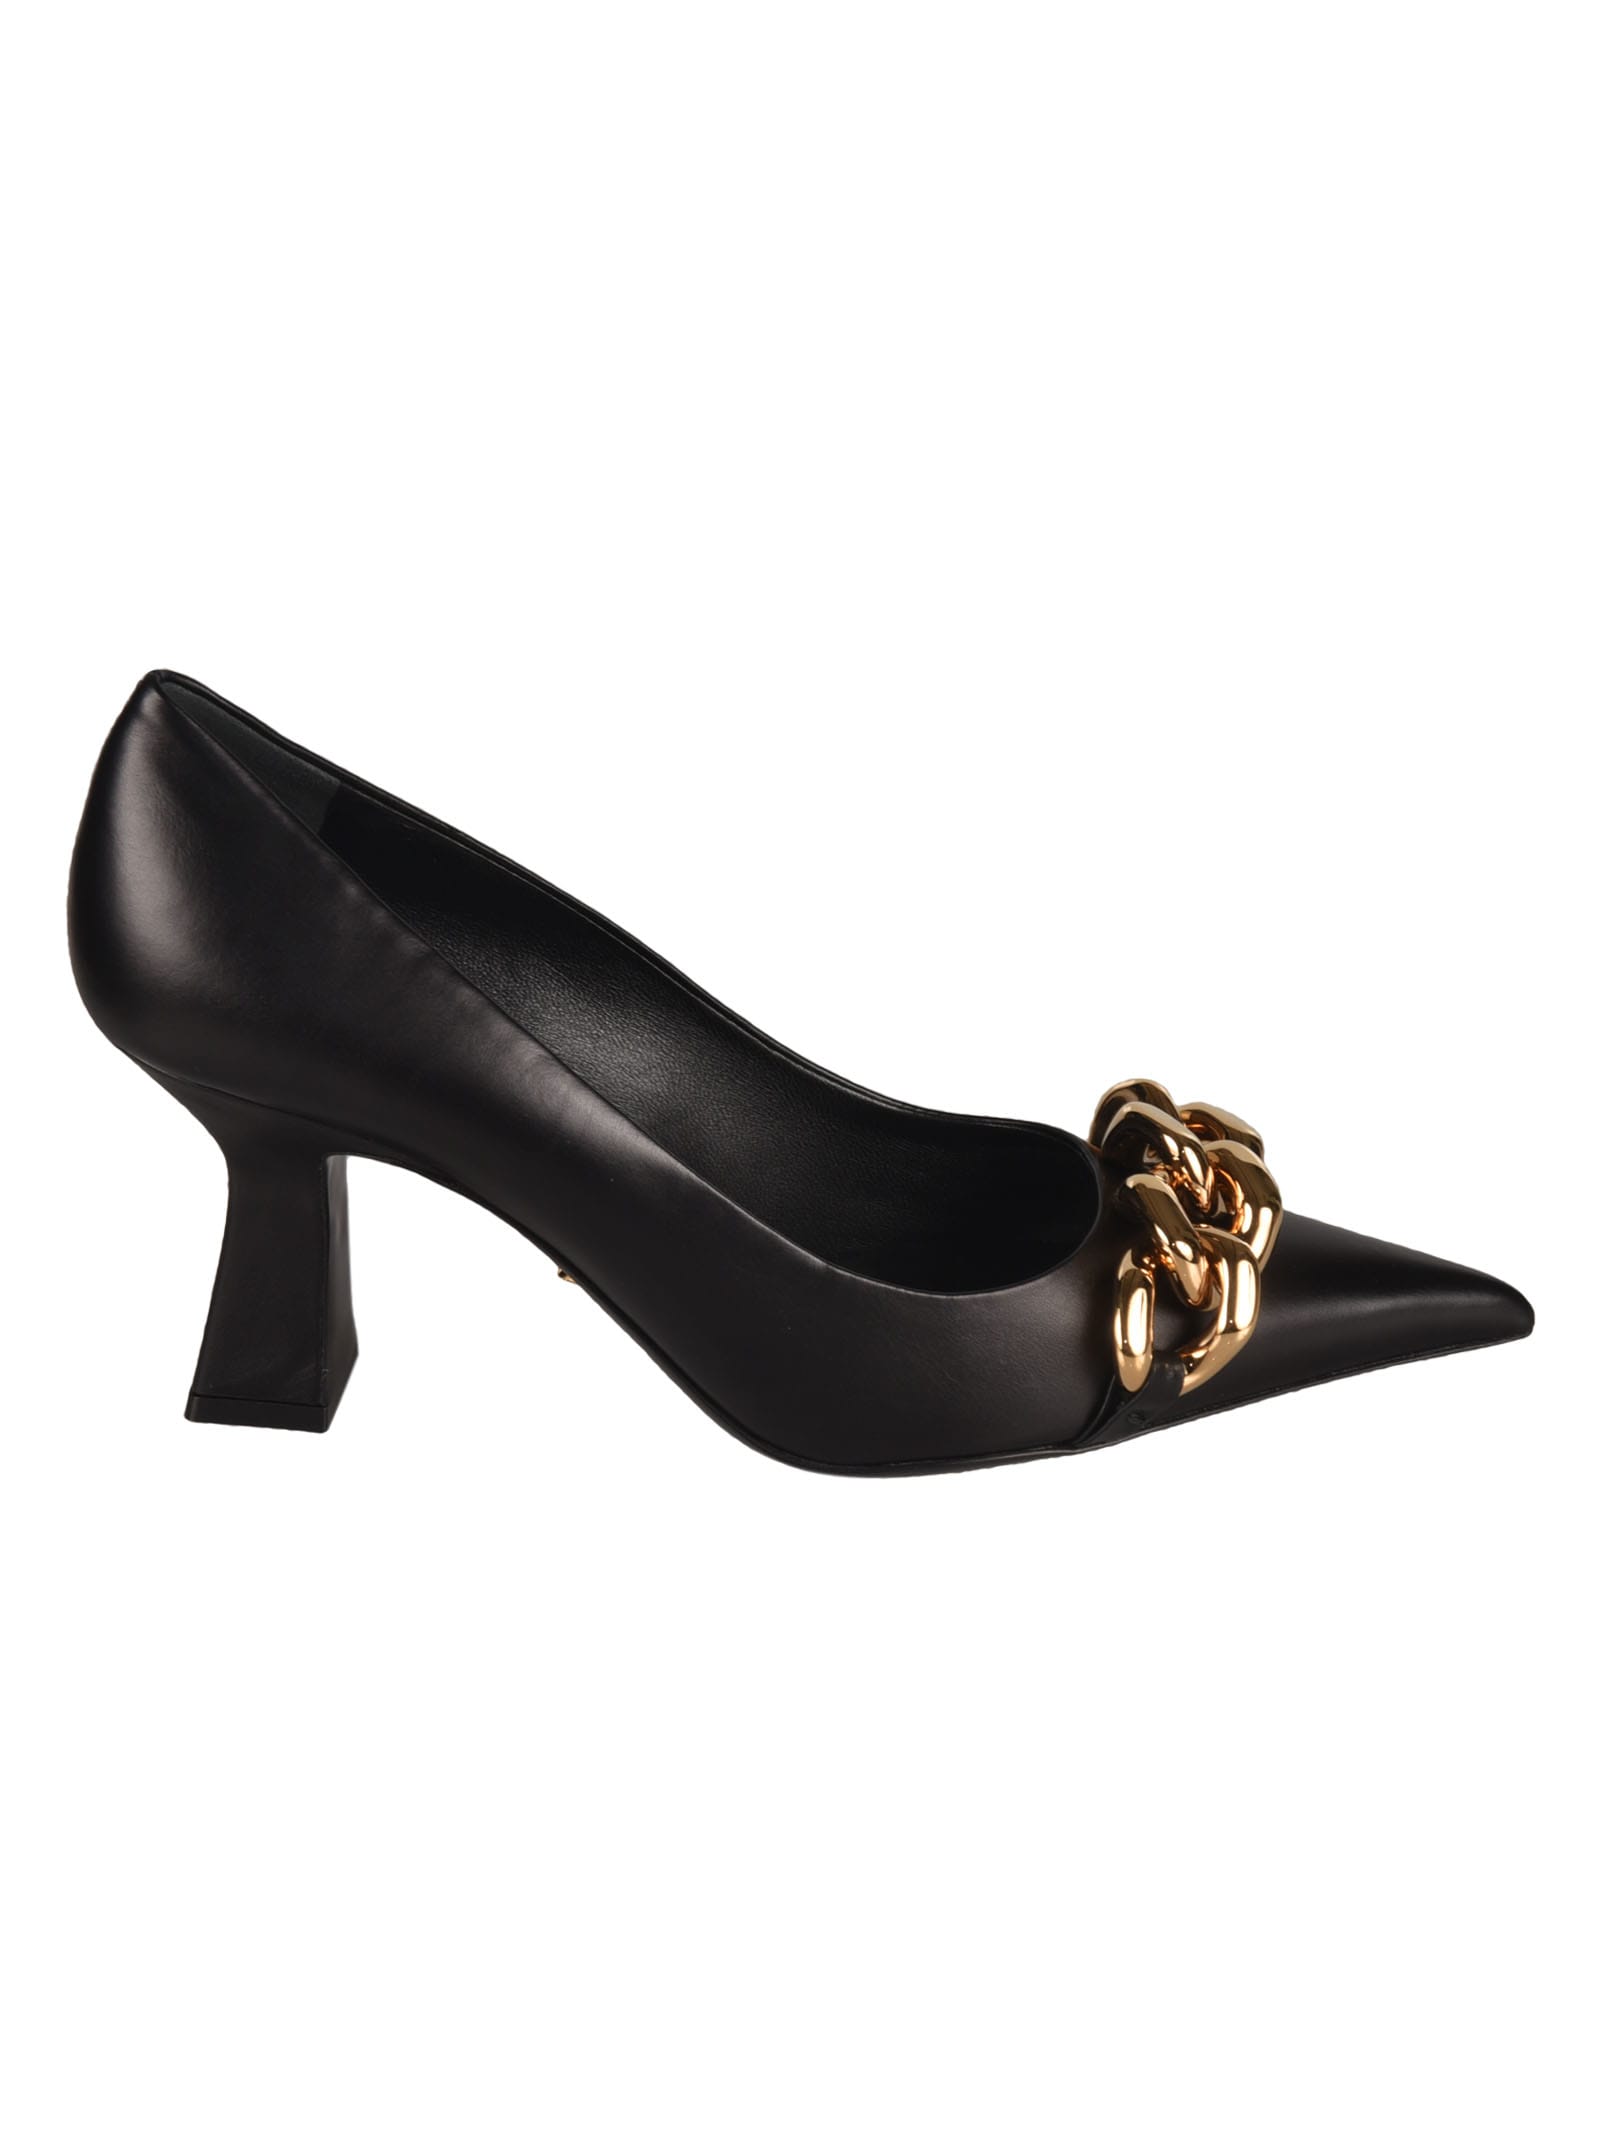 Versace Chain Embellished Pumps